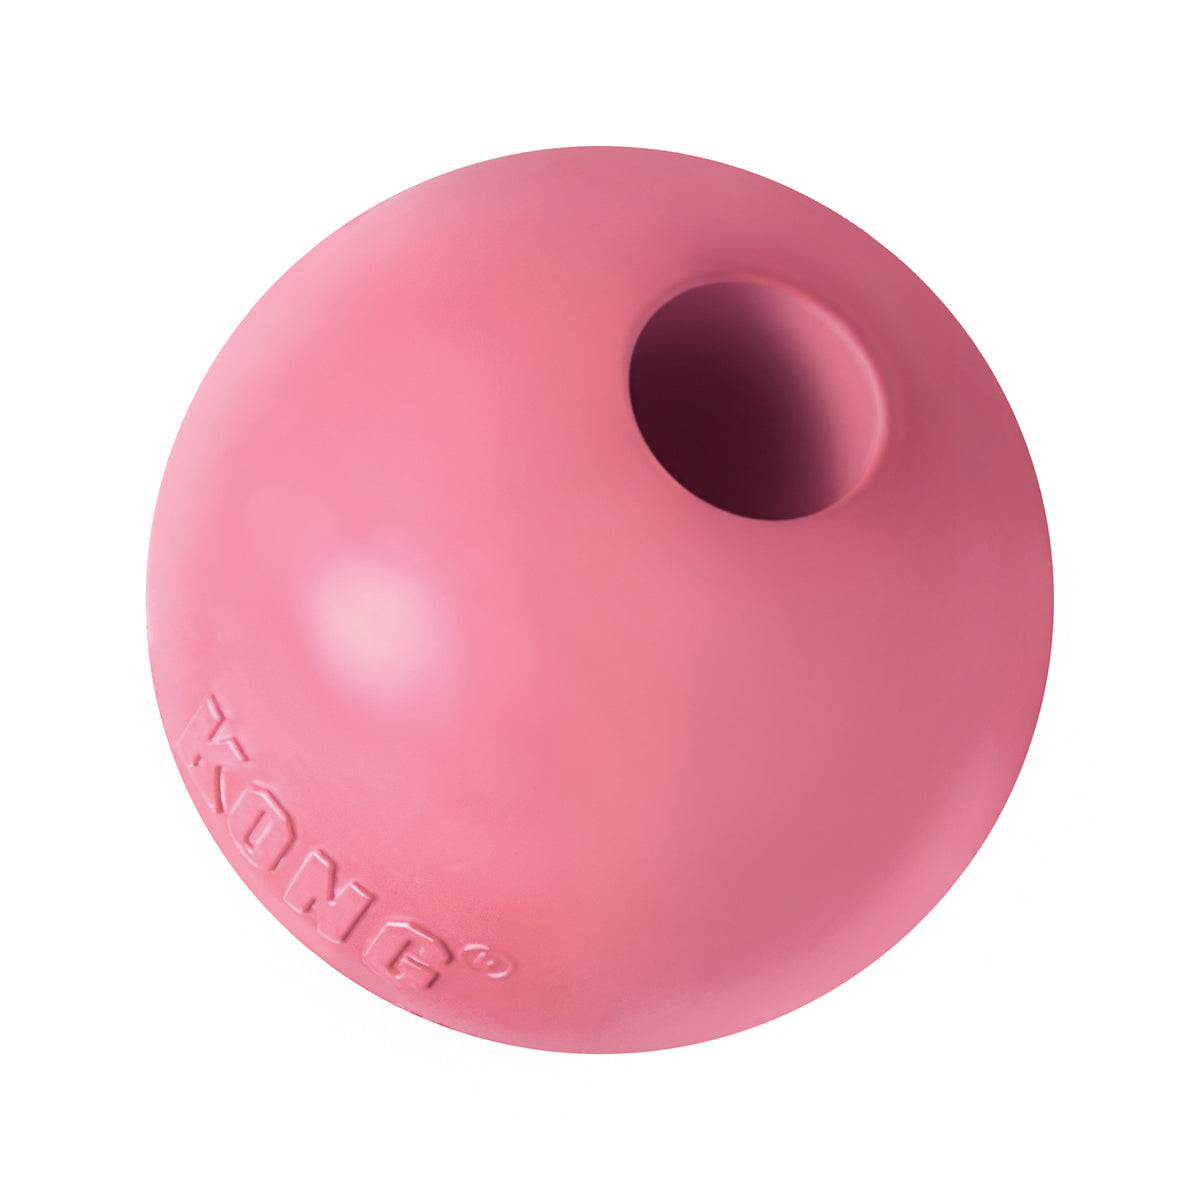 KONG Puppy Ball with Hole